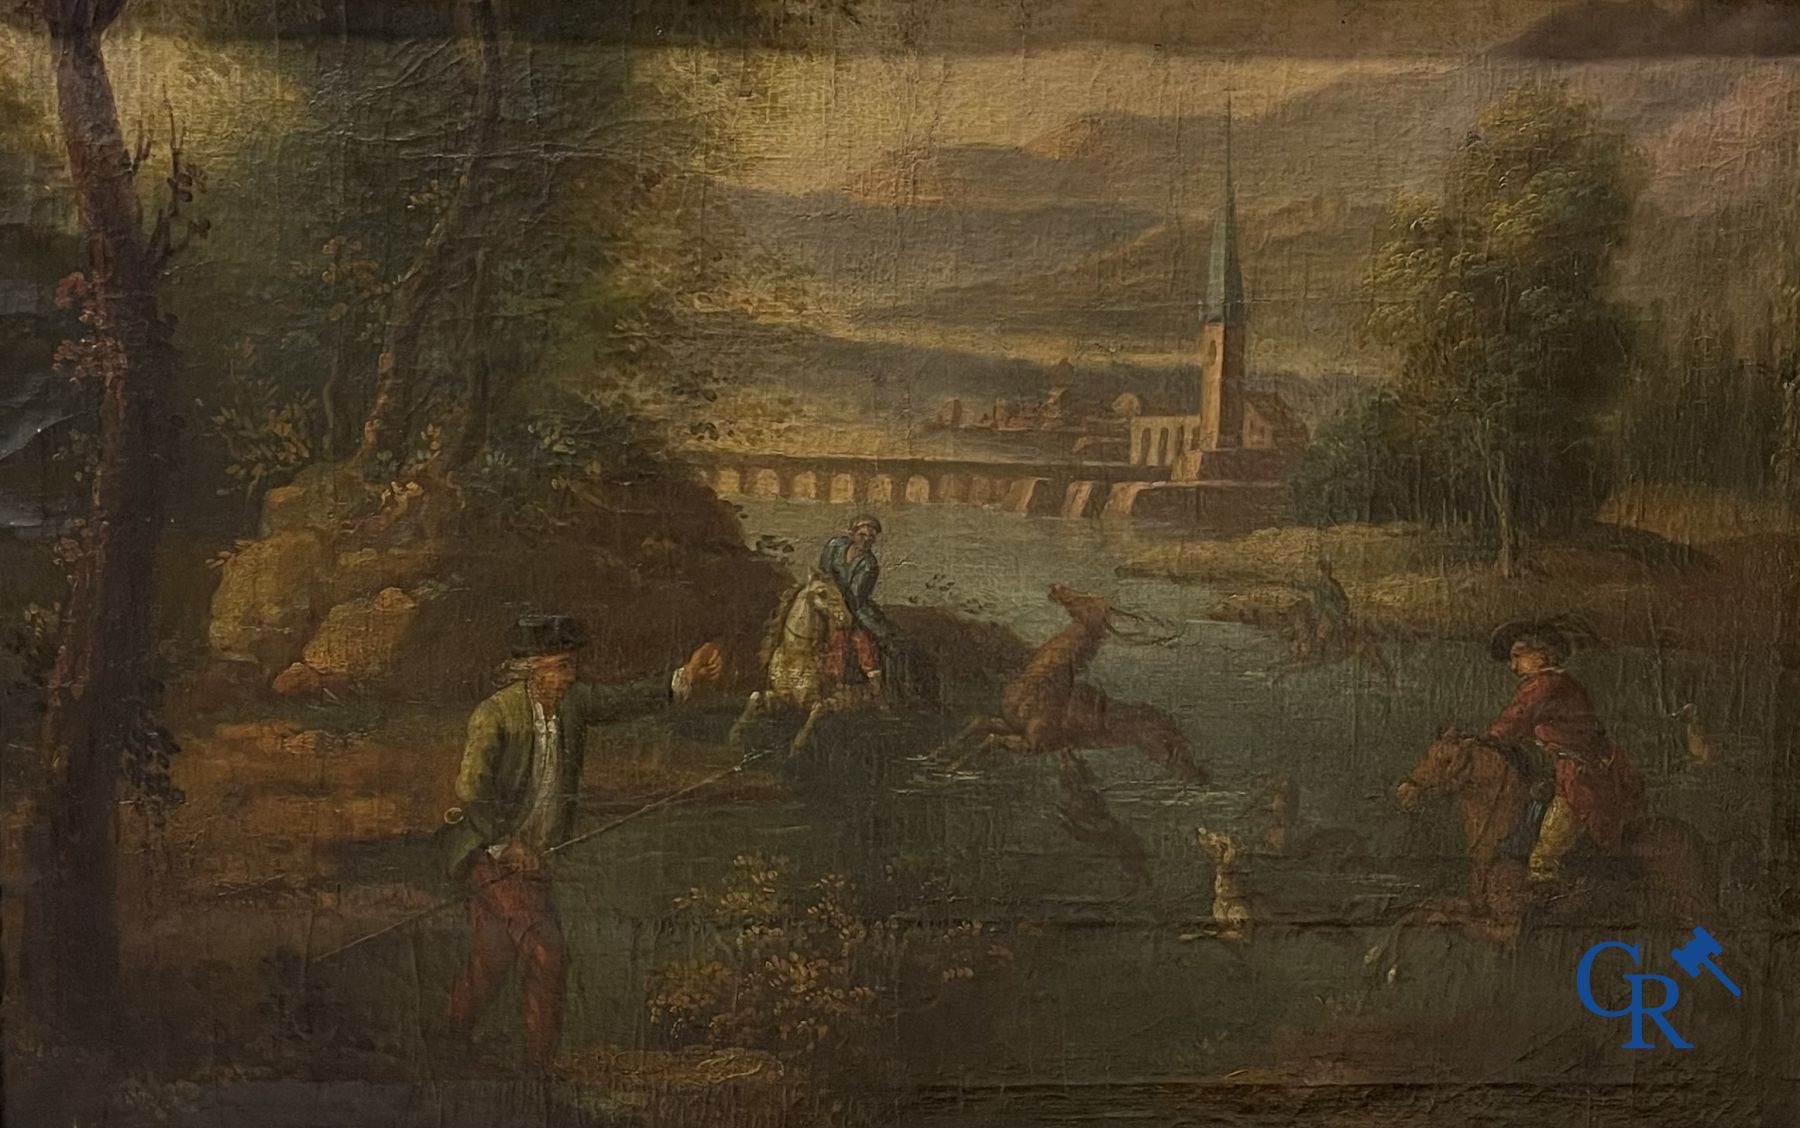 Painting: Oil on canvas, hunting scene, 18th century. - Image 7 of 8